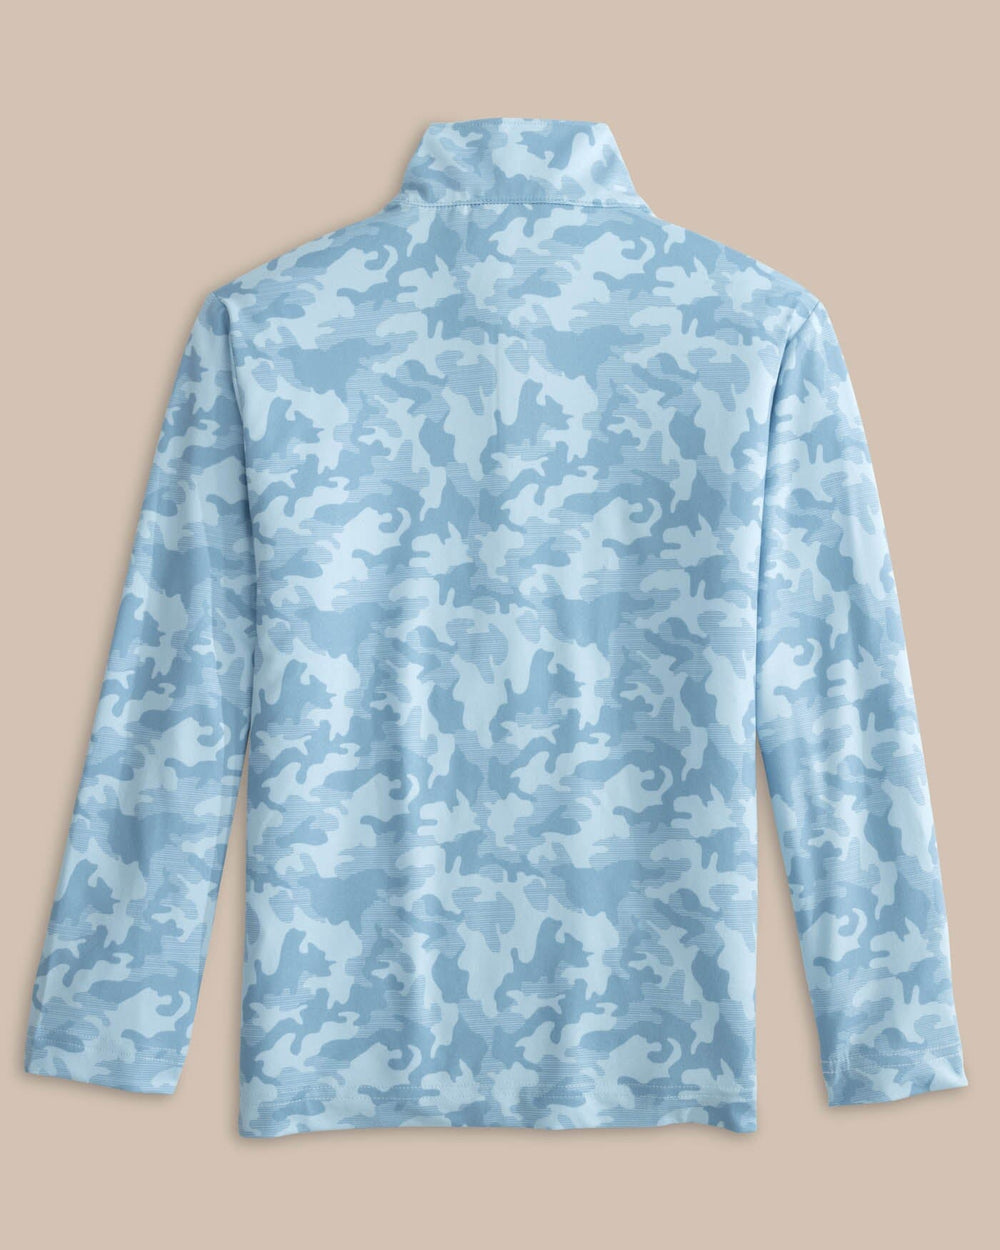 The back view of the Southern Tide Kids Island Camo Print Cruiser Quarter Zip by Southern Tide - Clearwater Blue